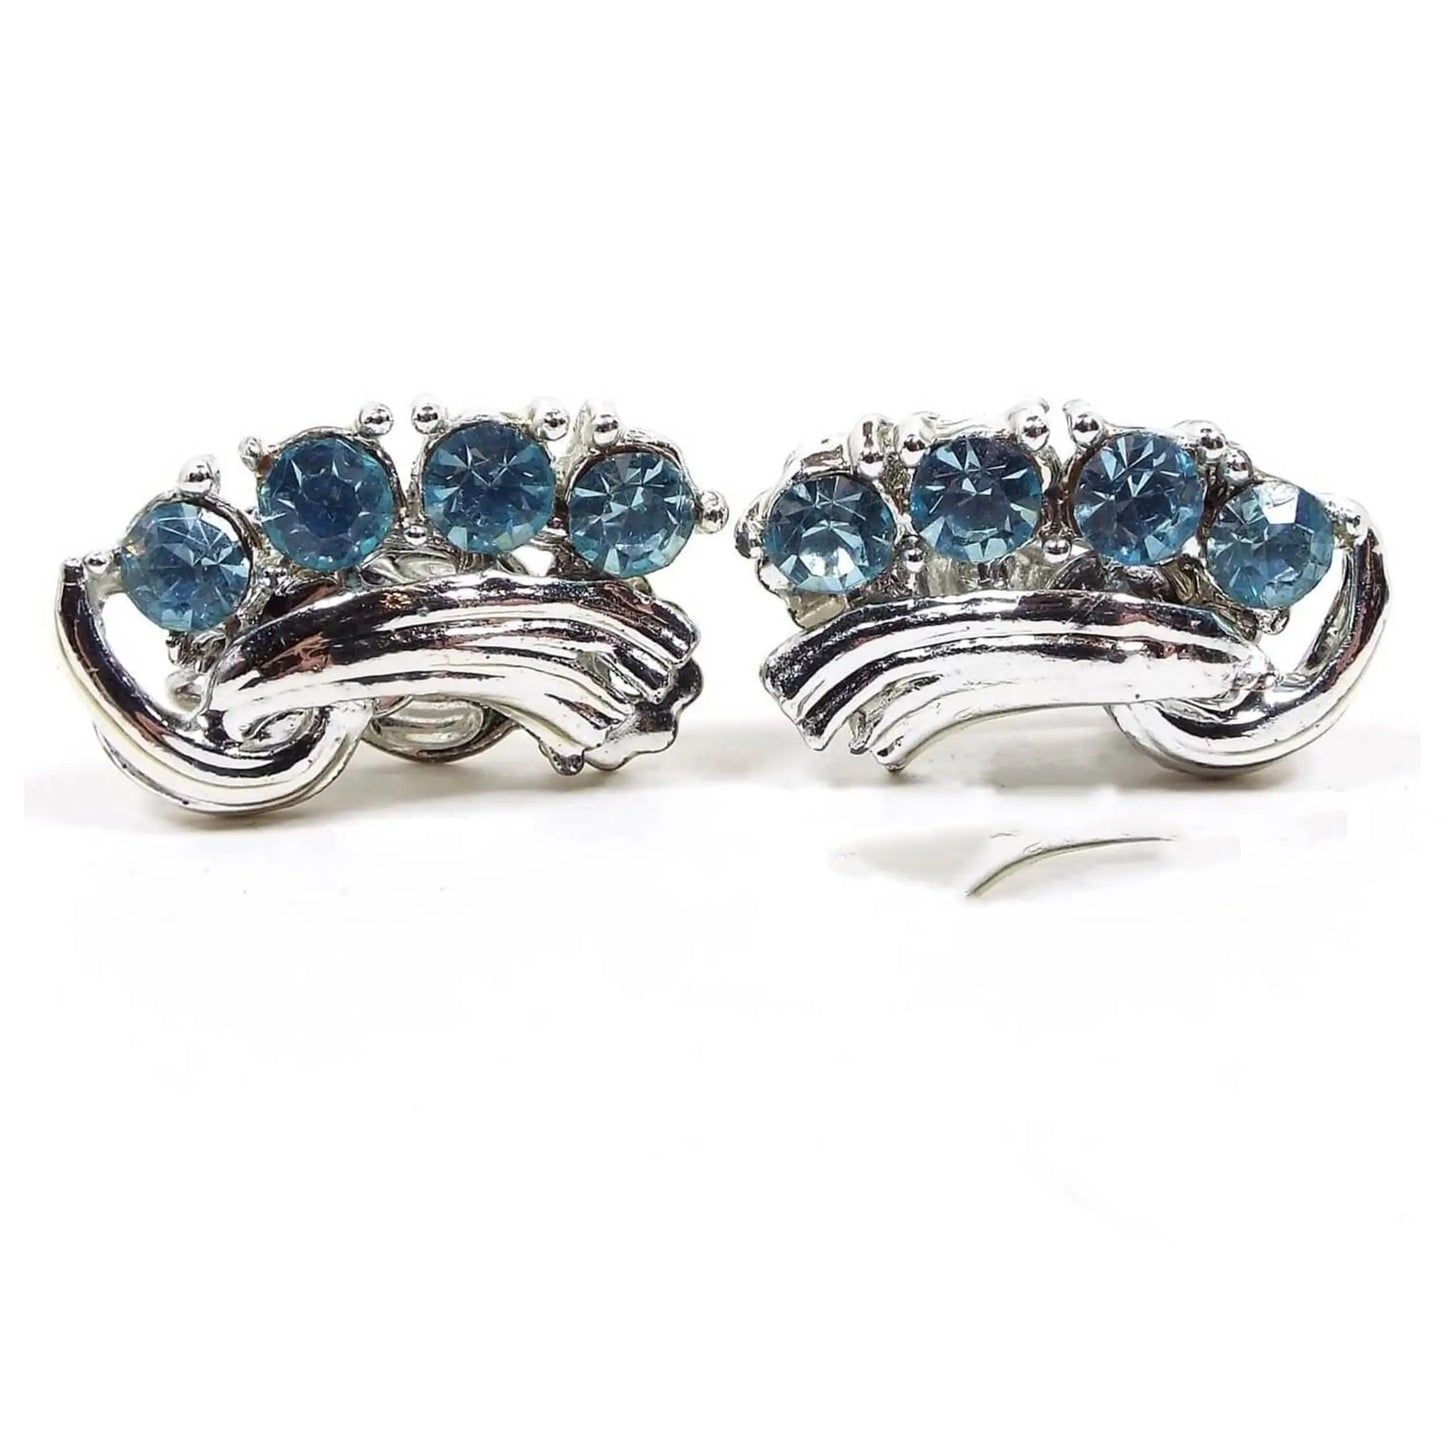 Front view of the Mid Century vintage blue rhinestone earrings. The metal is silver tone in color. There are a row of light blue round rhinestones on one side and a ribbon like strip of silver tone metal on the other.